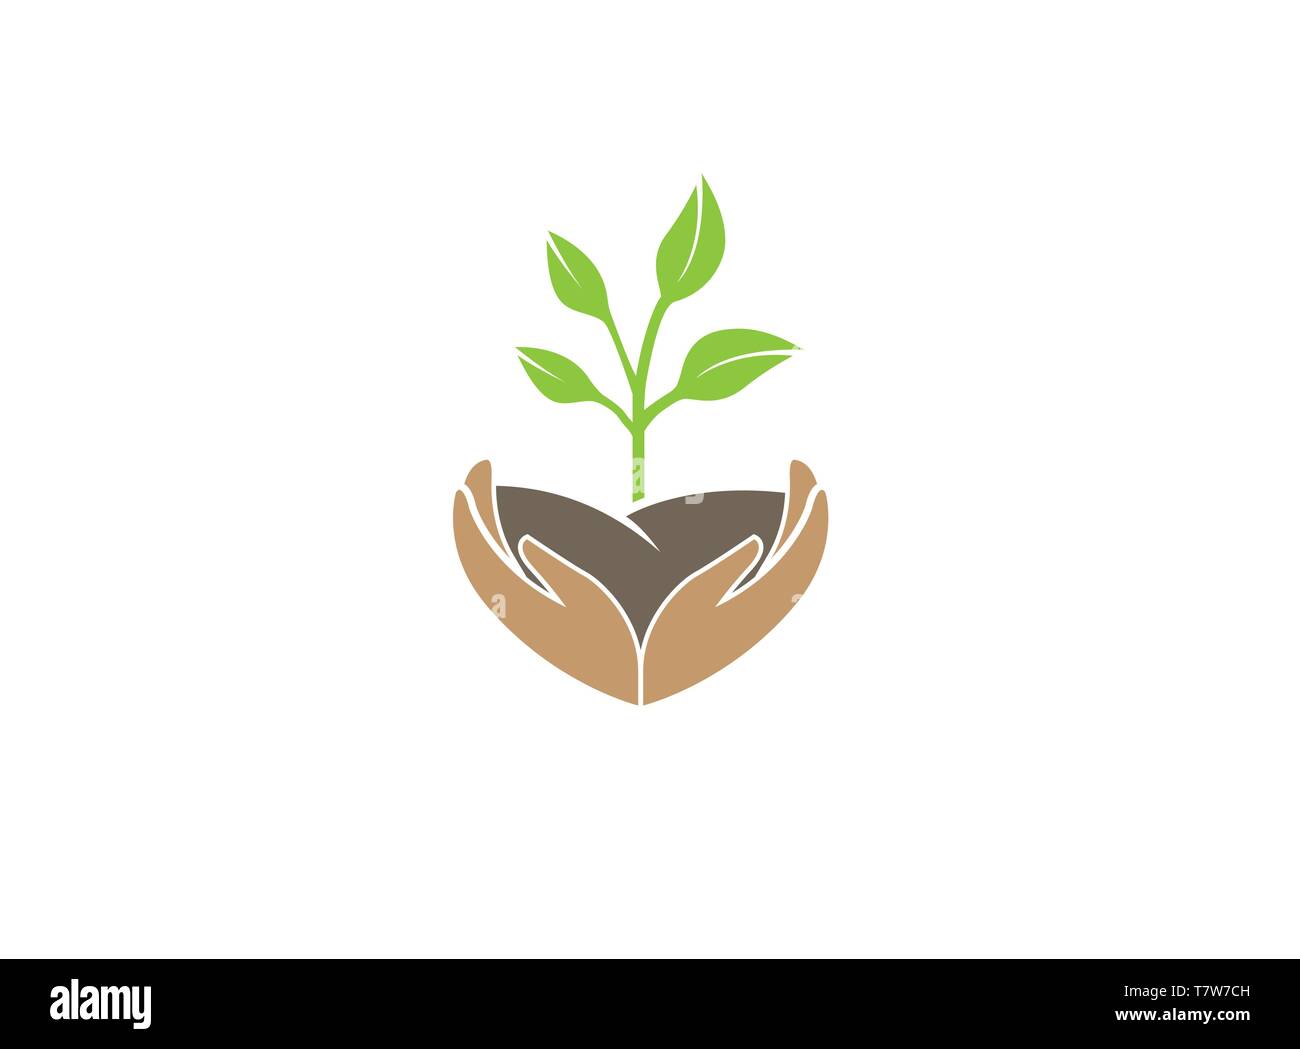 Hands that care for plants and nature logo design illustration Stock Vector